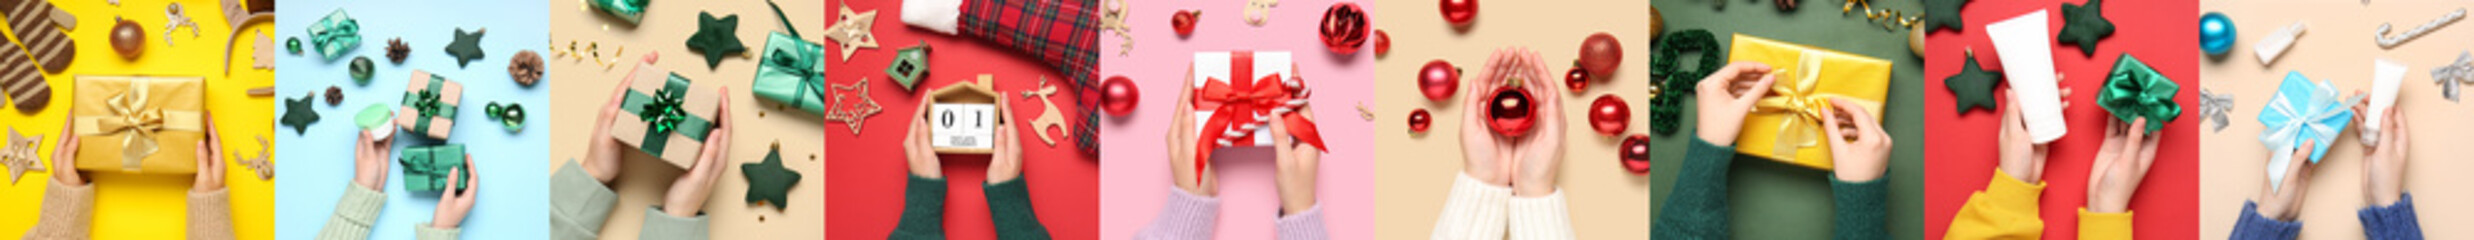 Collage of hands with Christmas gifts, decorations, calendar and cosmetics on color background